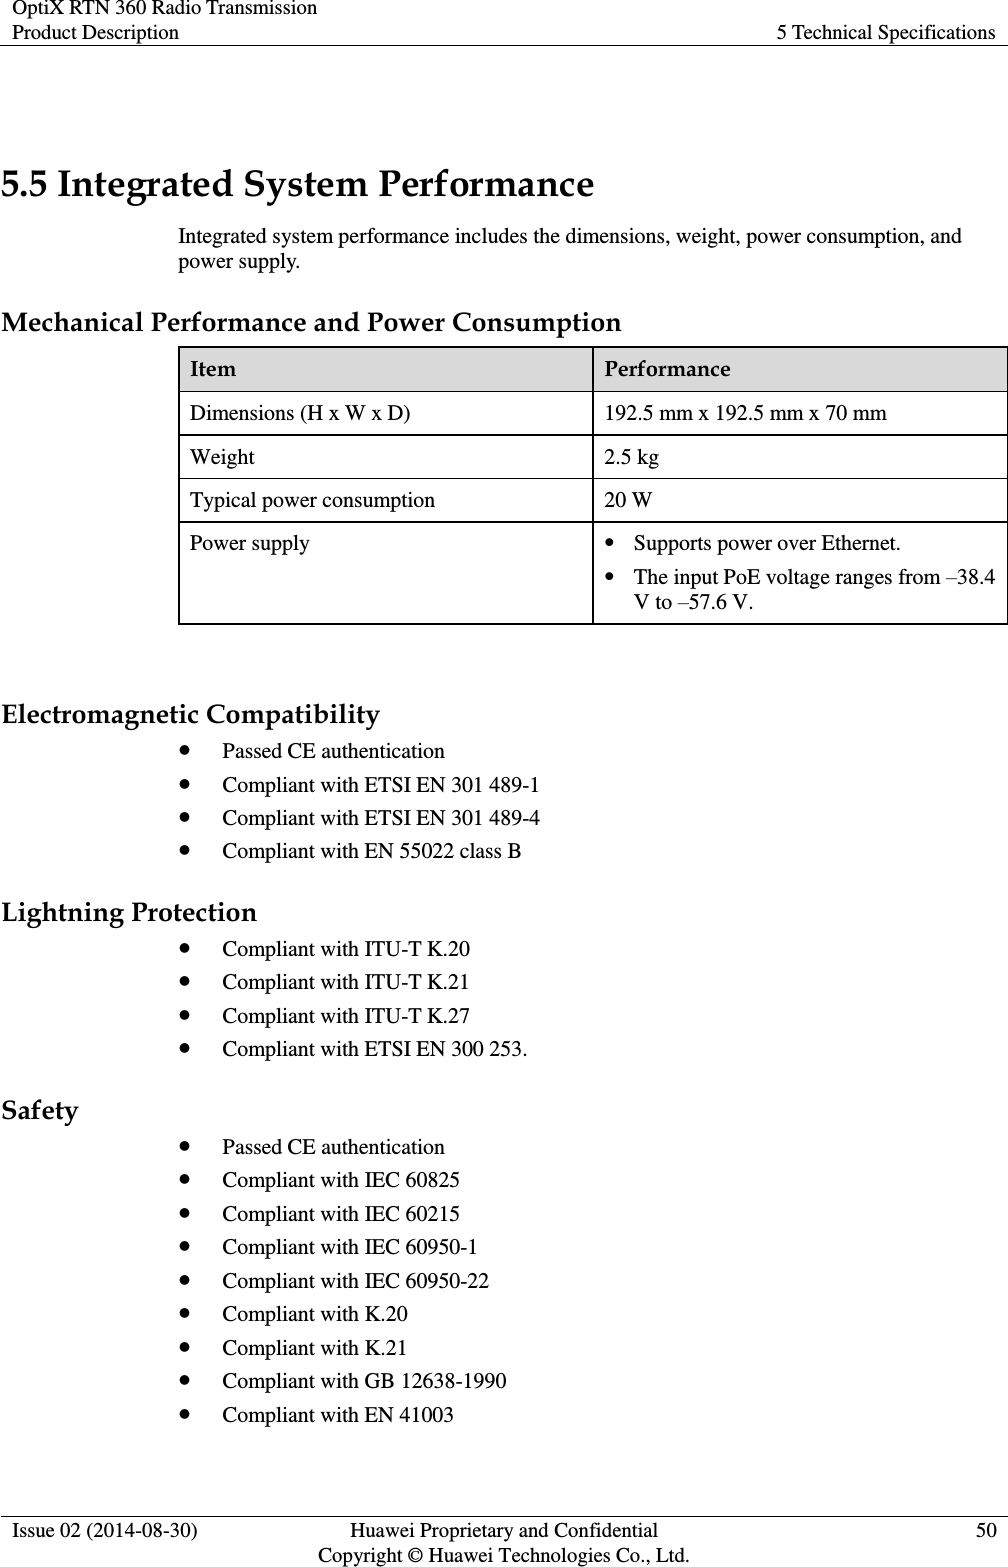 OptiX RTN 360 Radio Transmission Product Description 5 Technical Specifications  Issue 02 (2014-08-30) Huawei Proprietary and Confidential                                     Copyright © Huawei Technologies Co., Ltd. 50   5.5 Integrated System Performance Integrated system performance includes the dimensions, weight, power consumption, and power supply. Mechanical Performance and Power Consumption Item Performance Dimensions (H x W x D) 192.5 mm x 192.5 mm x 70 mm Weight 2.5 kg Typical power consumption 20 W Power supply  Supports power over Ethernet.  The input PoE voltage ranges from –38.4 V to –57.6 V.    Electromagnetic Compatibility  Passed CE authentication  Compliant with ETSI EN 301 489-1  Compliant with ETSI EN 301 489-4  Compliant with EN 55022 class B Lightning Protection  Compliant with ITU-T K.20  Compliant with ITU-T K.21  Compliant with ITU-T K.27  Compliant with ETSI EN 300 253. Safety  Passed CE authentication  Compliant with IEC 60825  Compliant with IEC 60215  Compliant with IEC 60950-1  Compliant with IEC 60950-22  Compliant with K.20  Compliant with K.21  Compliant with GB 12638-1990  Compliant with EN 41003 